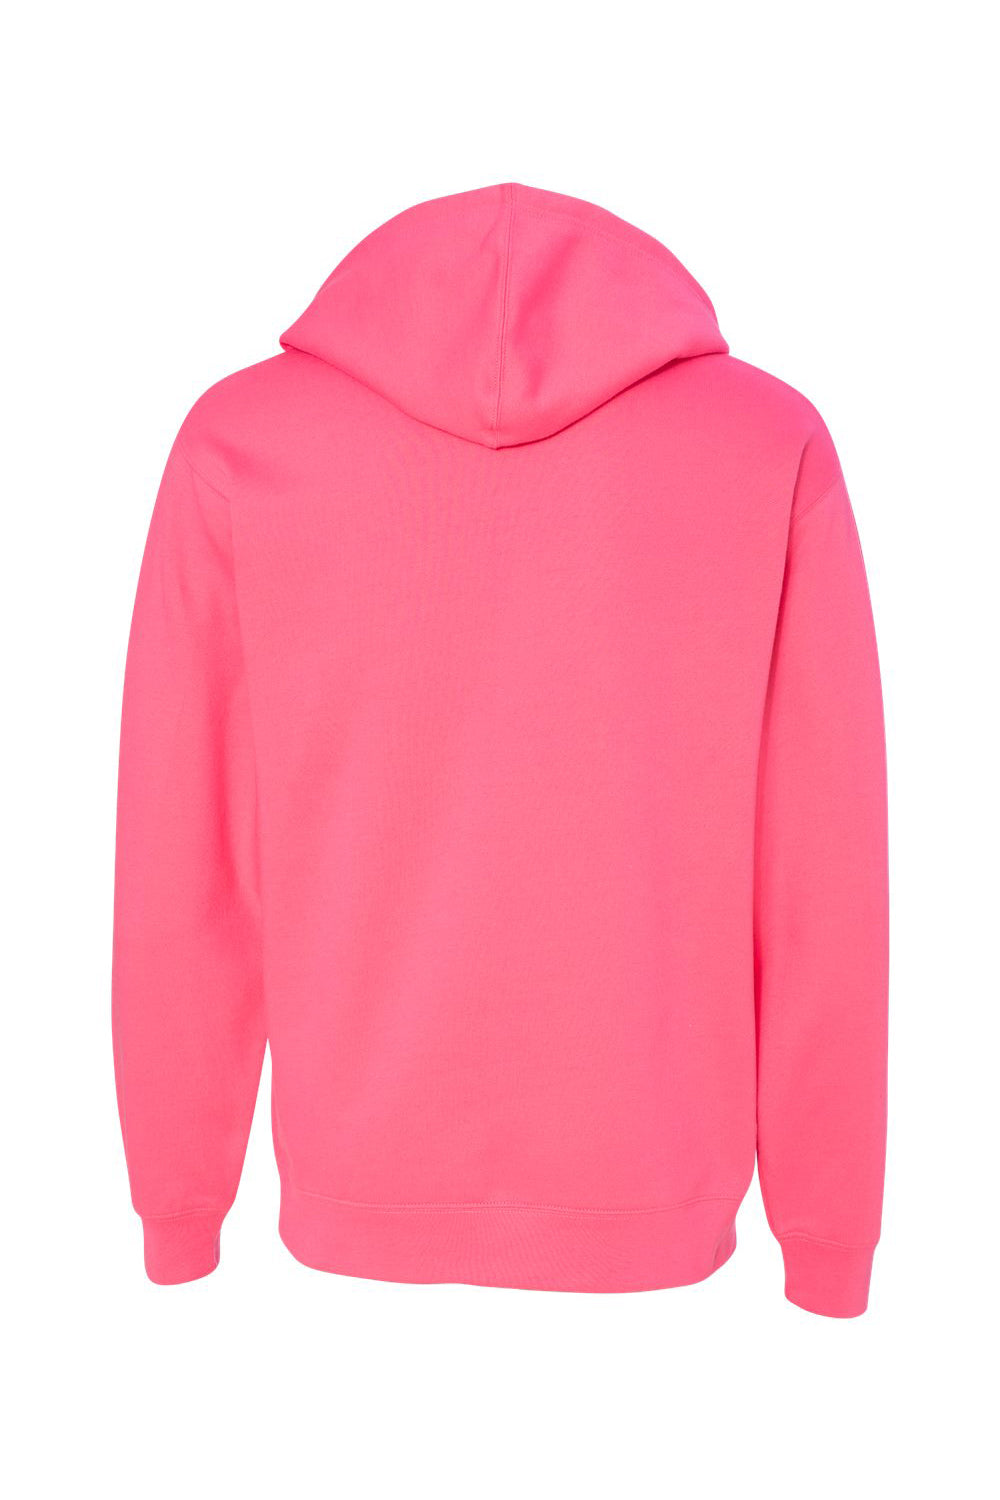 Independent Trading Co. SS4500 Mens Hooded Sweatshirt Hoodie Neon Pink Flat Back